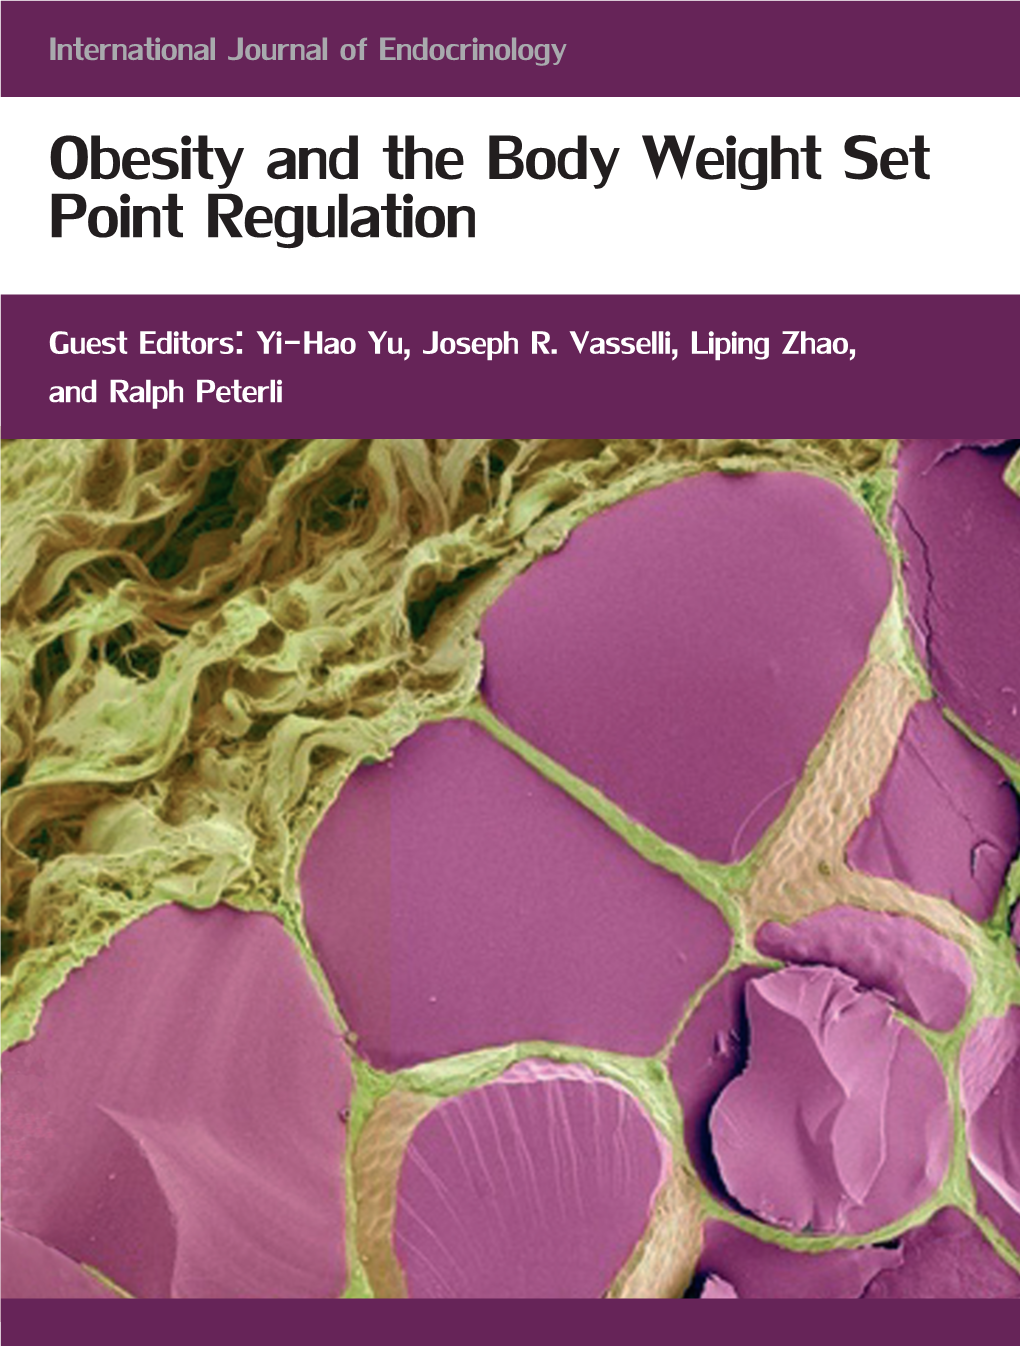 Obesity and the Body Weight Set Point Regulation